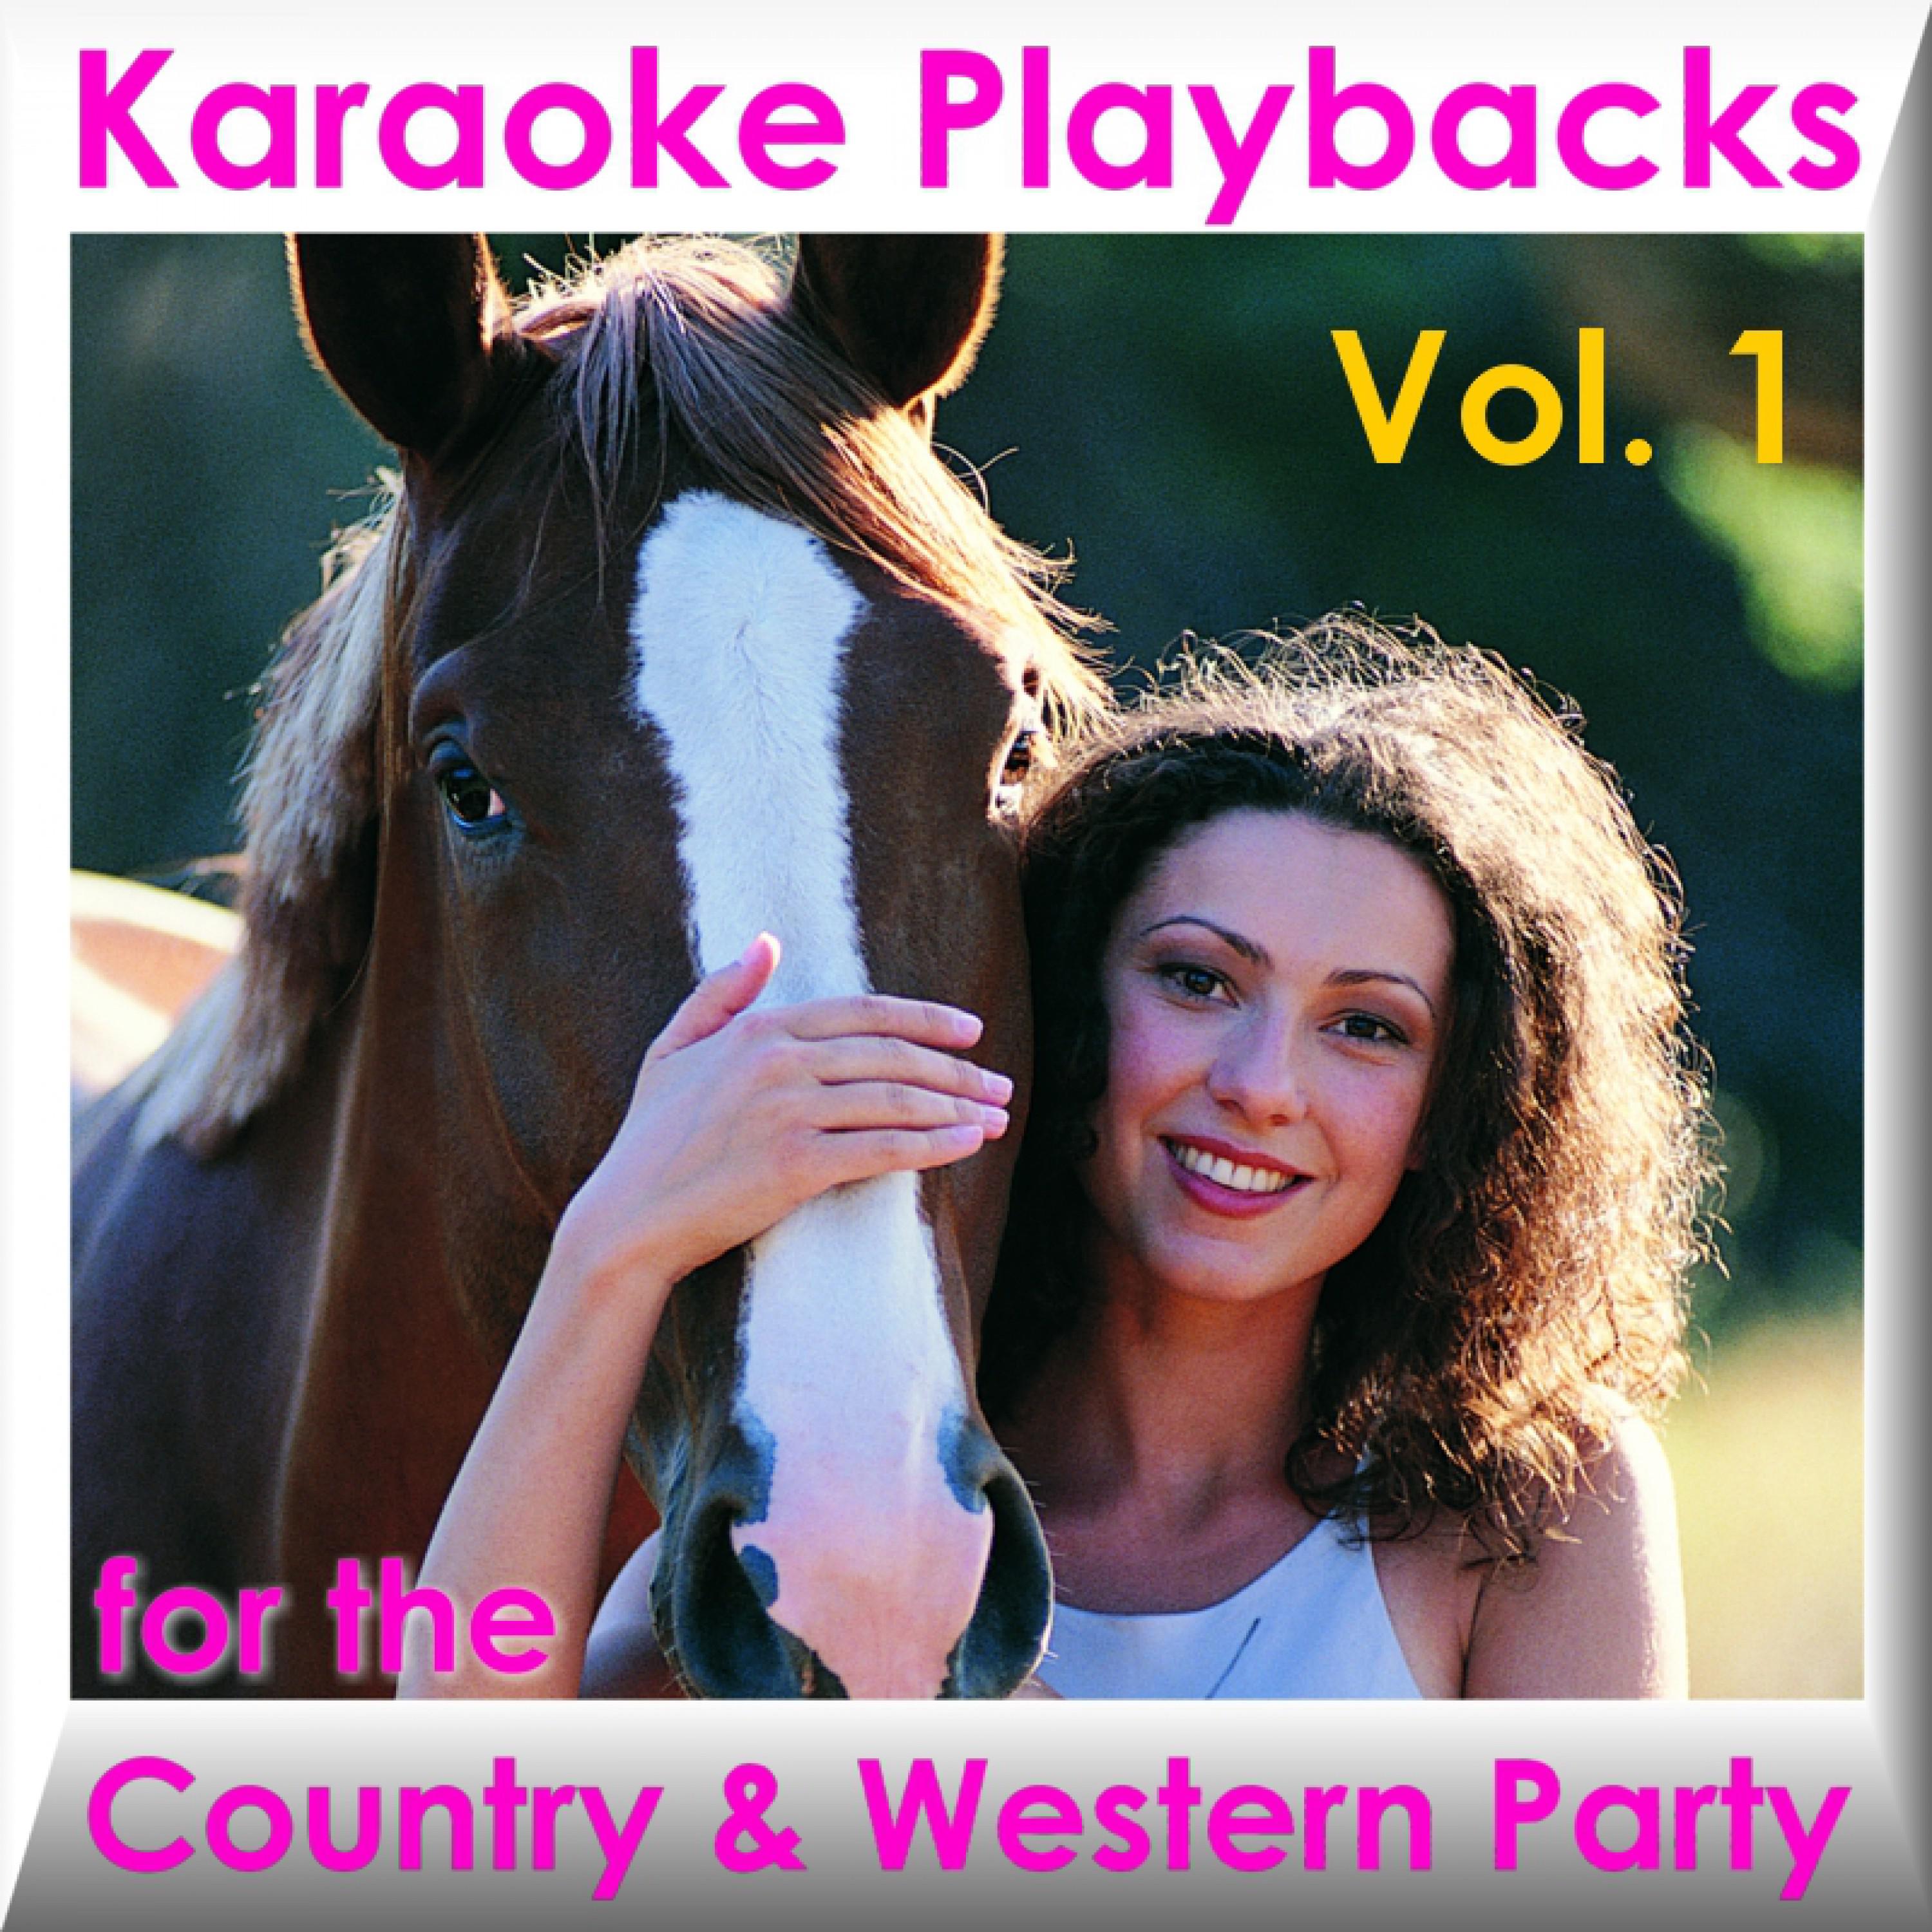 Carry Me Back to Old Virginny - Playback - Karaoke (Playback With Choir - Playback Mit Chor)